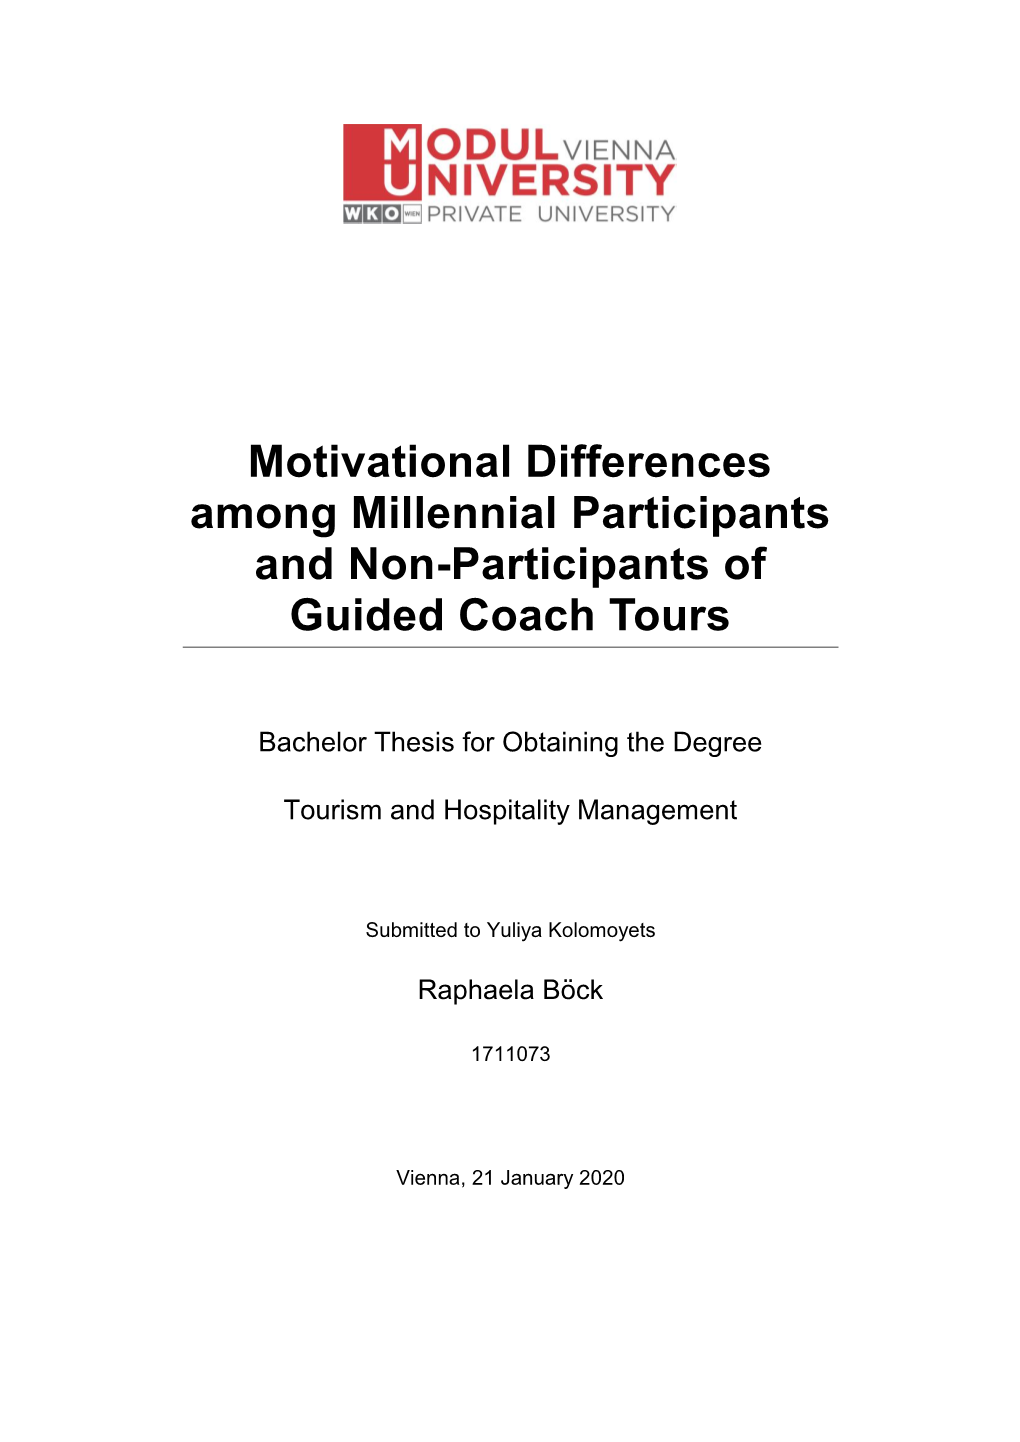 Motivational Differences Among Millennial Participants and Non-Participants of Guided Coach Tours